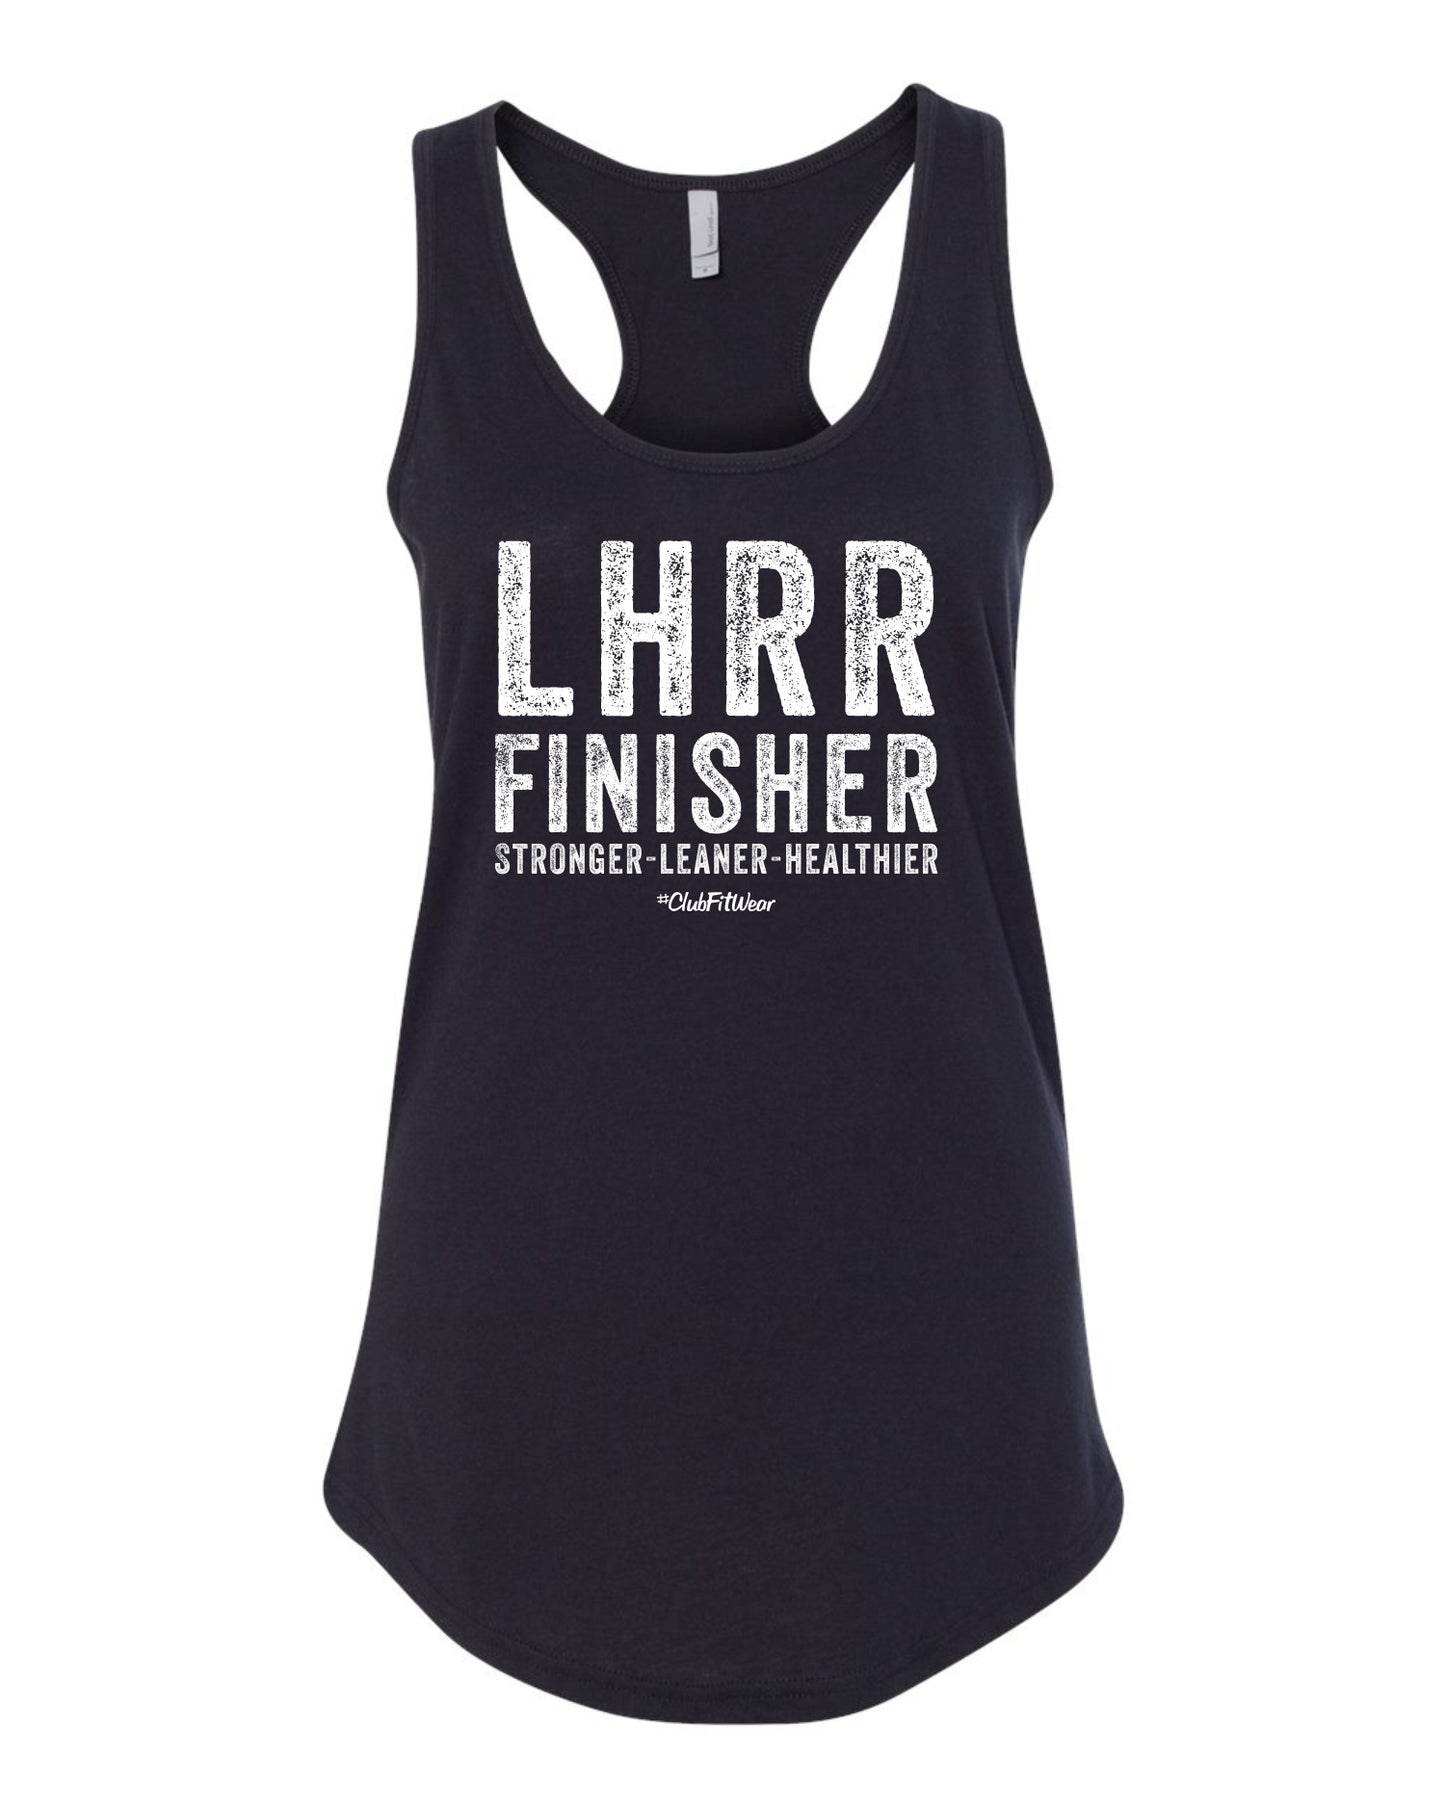 LHRR Finisher – ClubFitWear